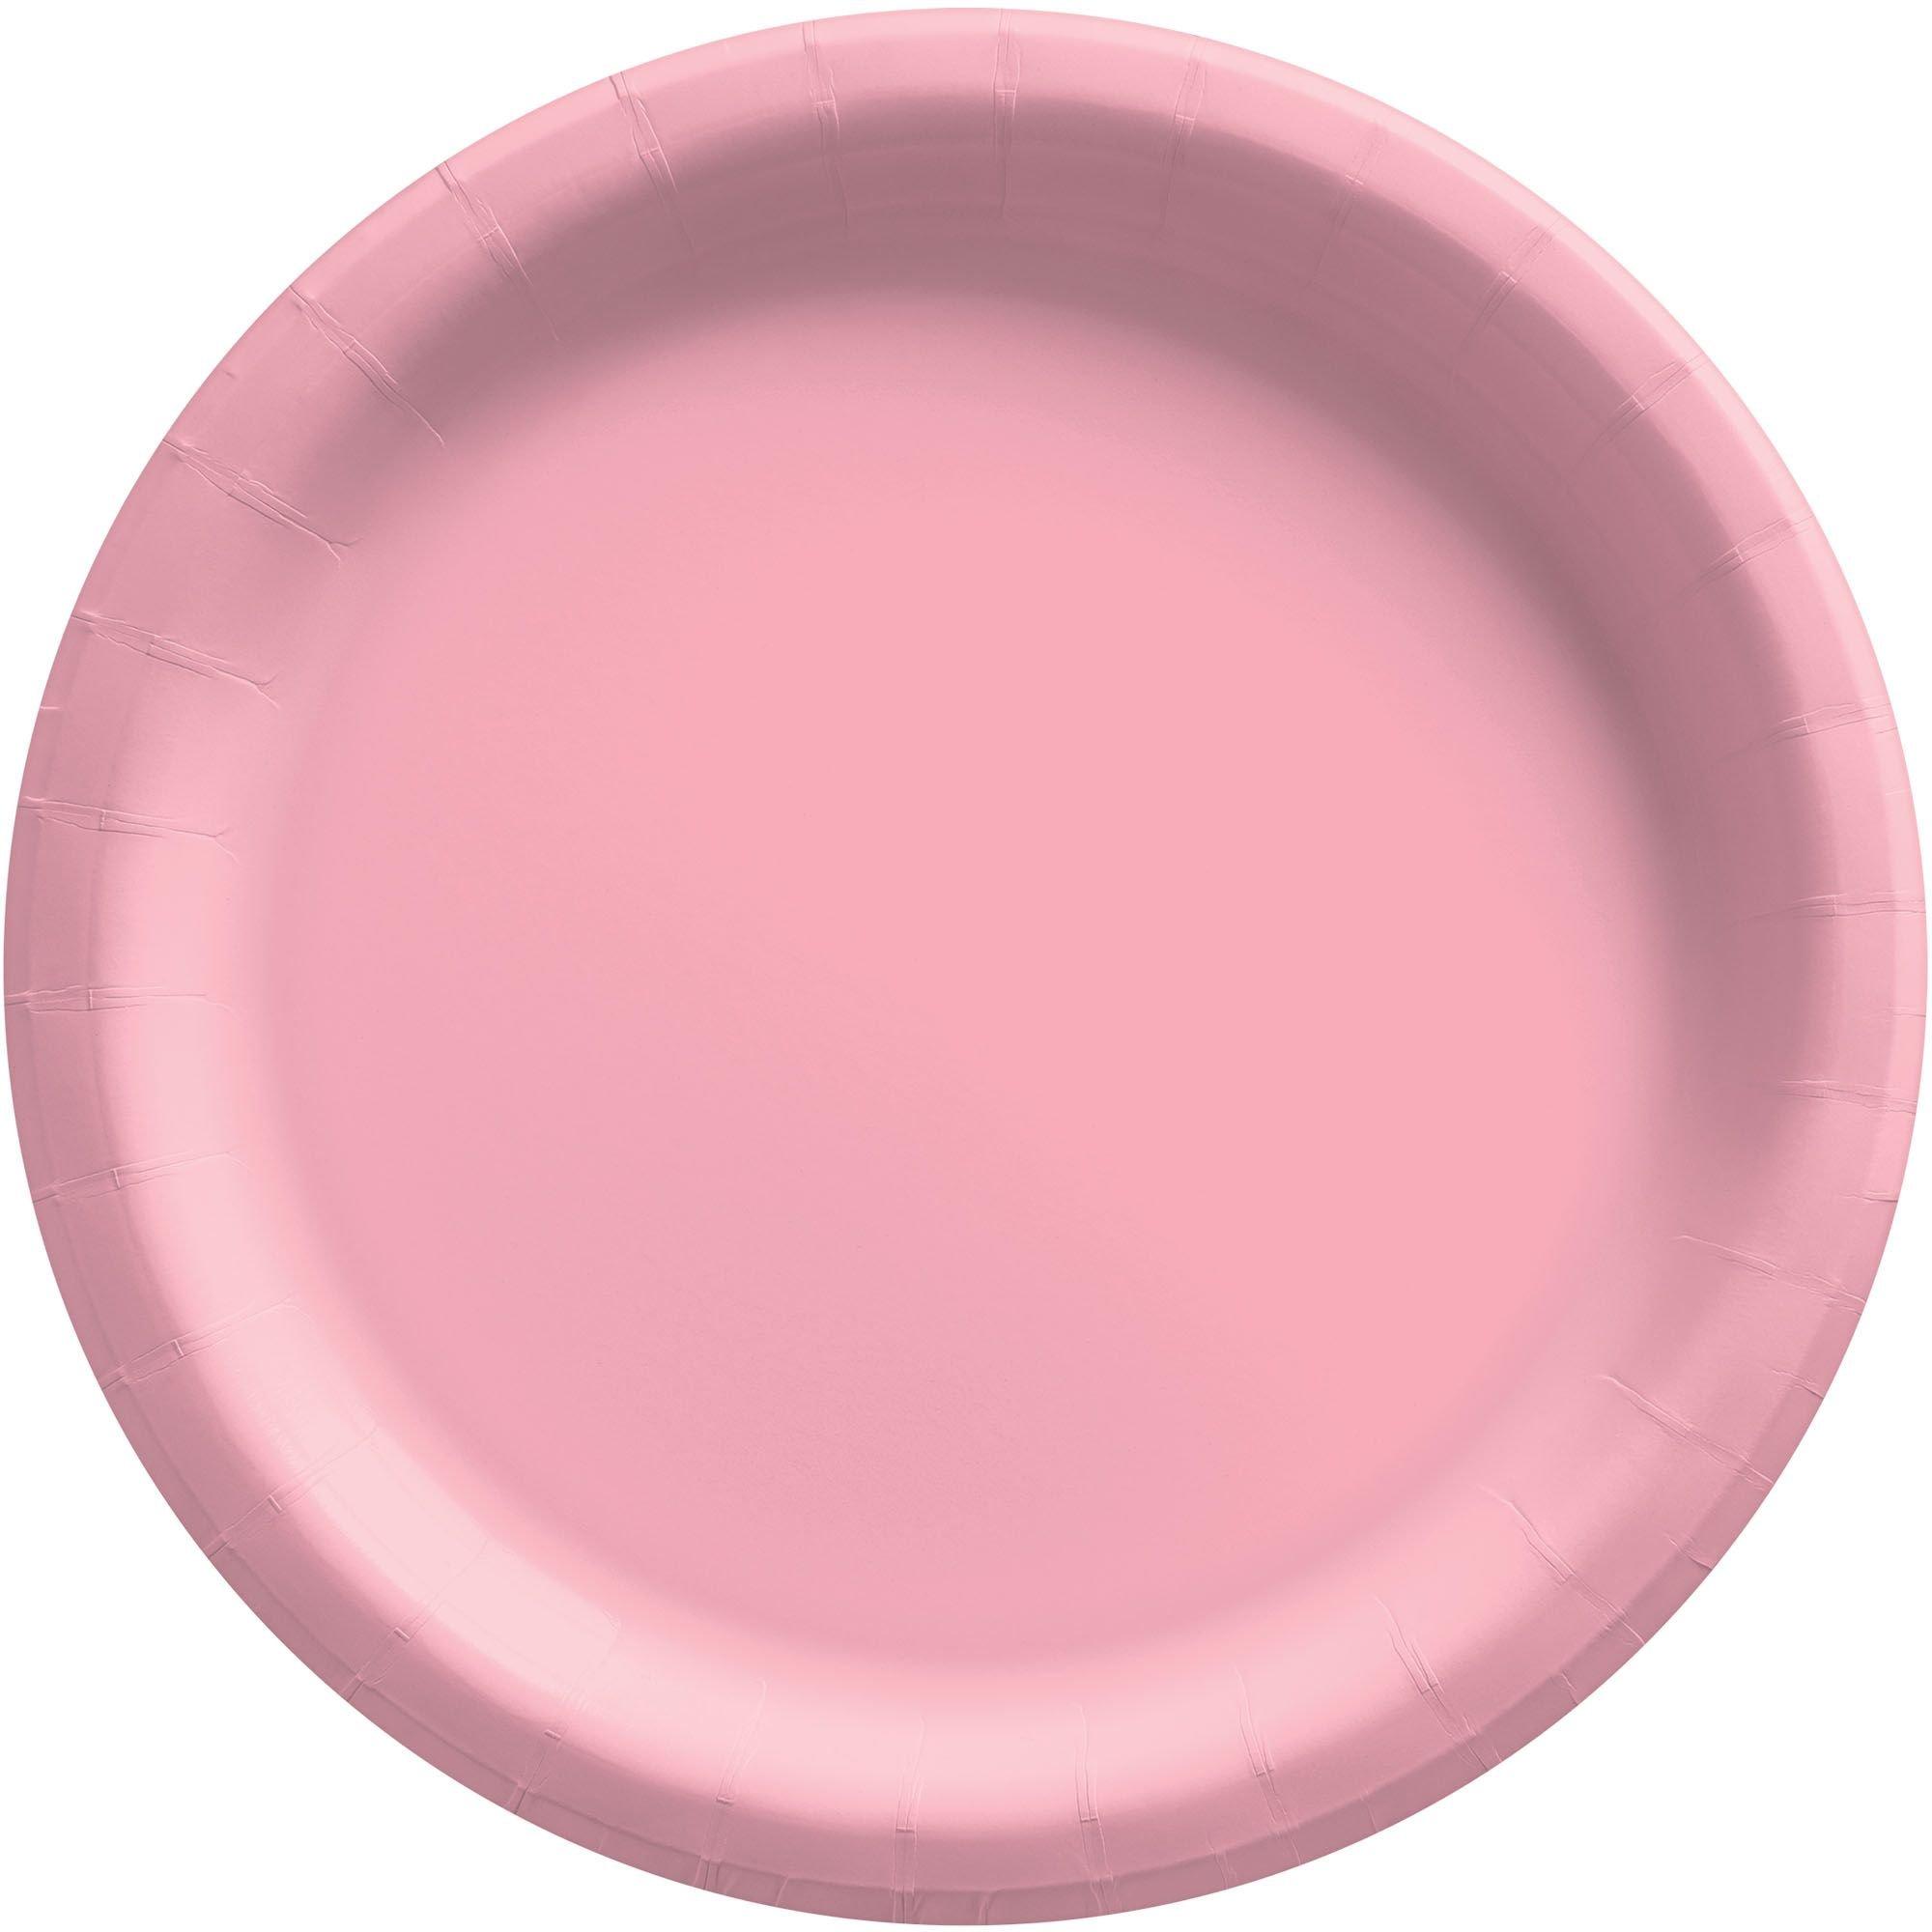 Paper Dinner Plates Bright Pink, 8 1/2 Inches Paper Plates Disposable,  Strong and Sturdy Disposable Plates for Party, Dinner, Holiday, Picnic, or